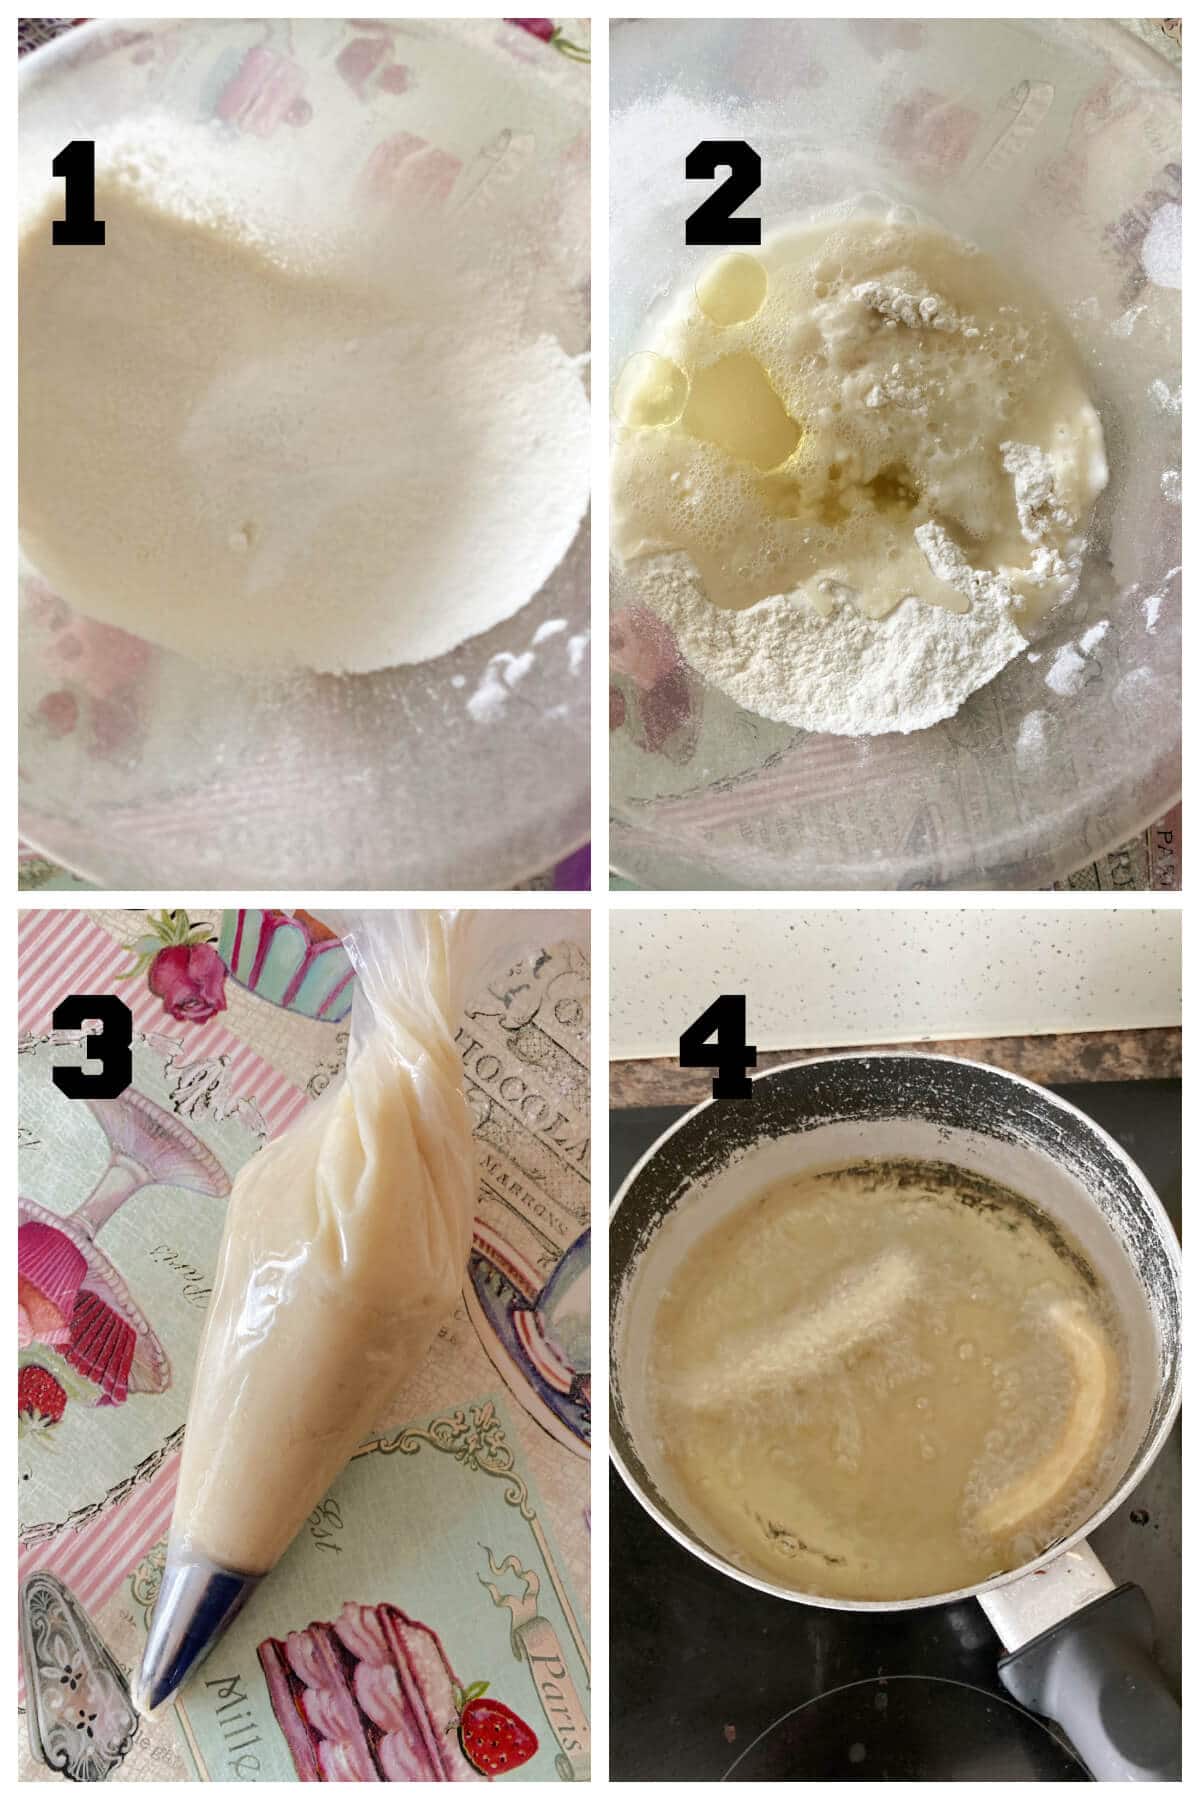 Collage of 4 photos to show how to make churros.